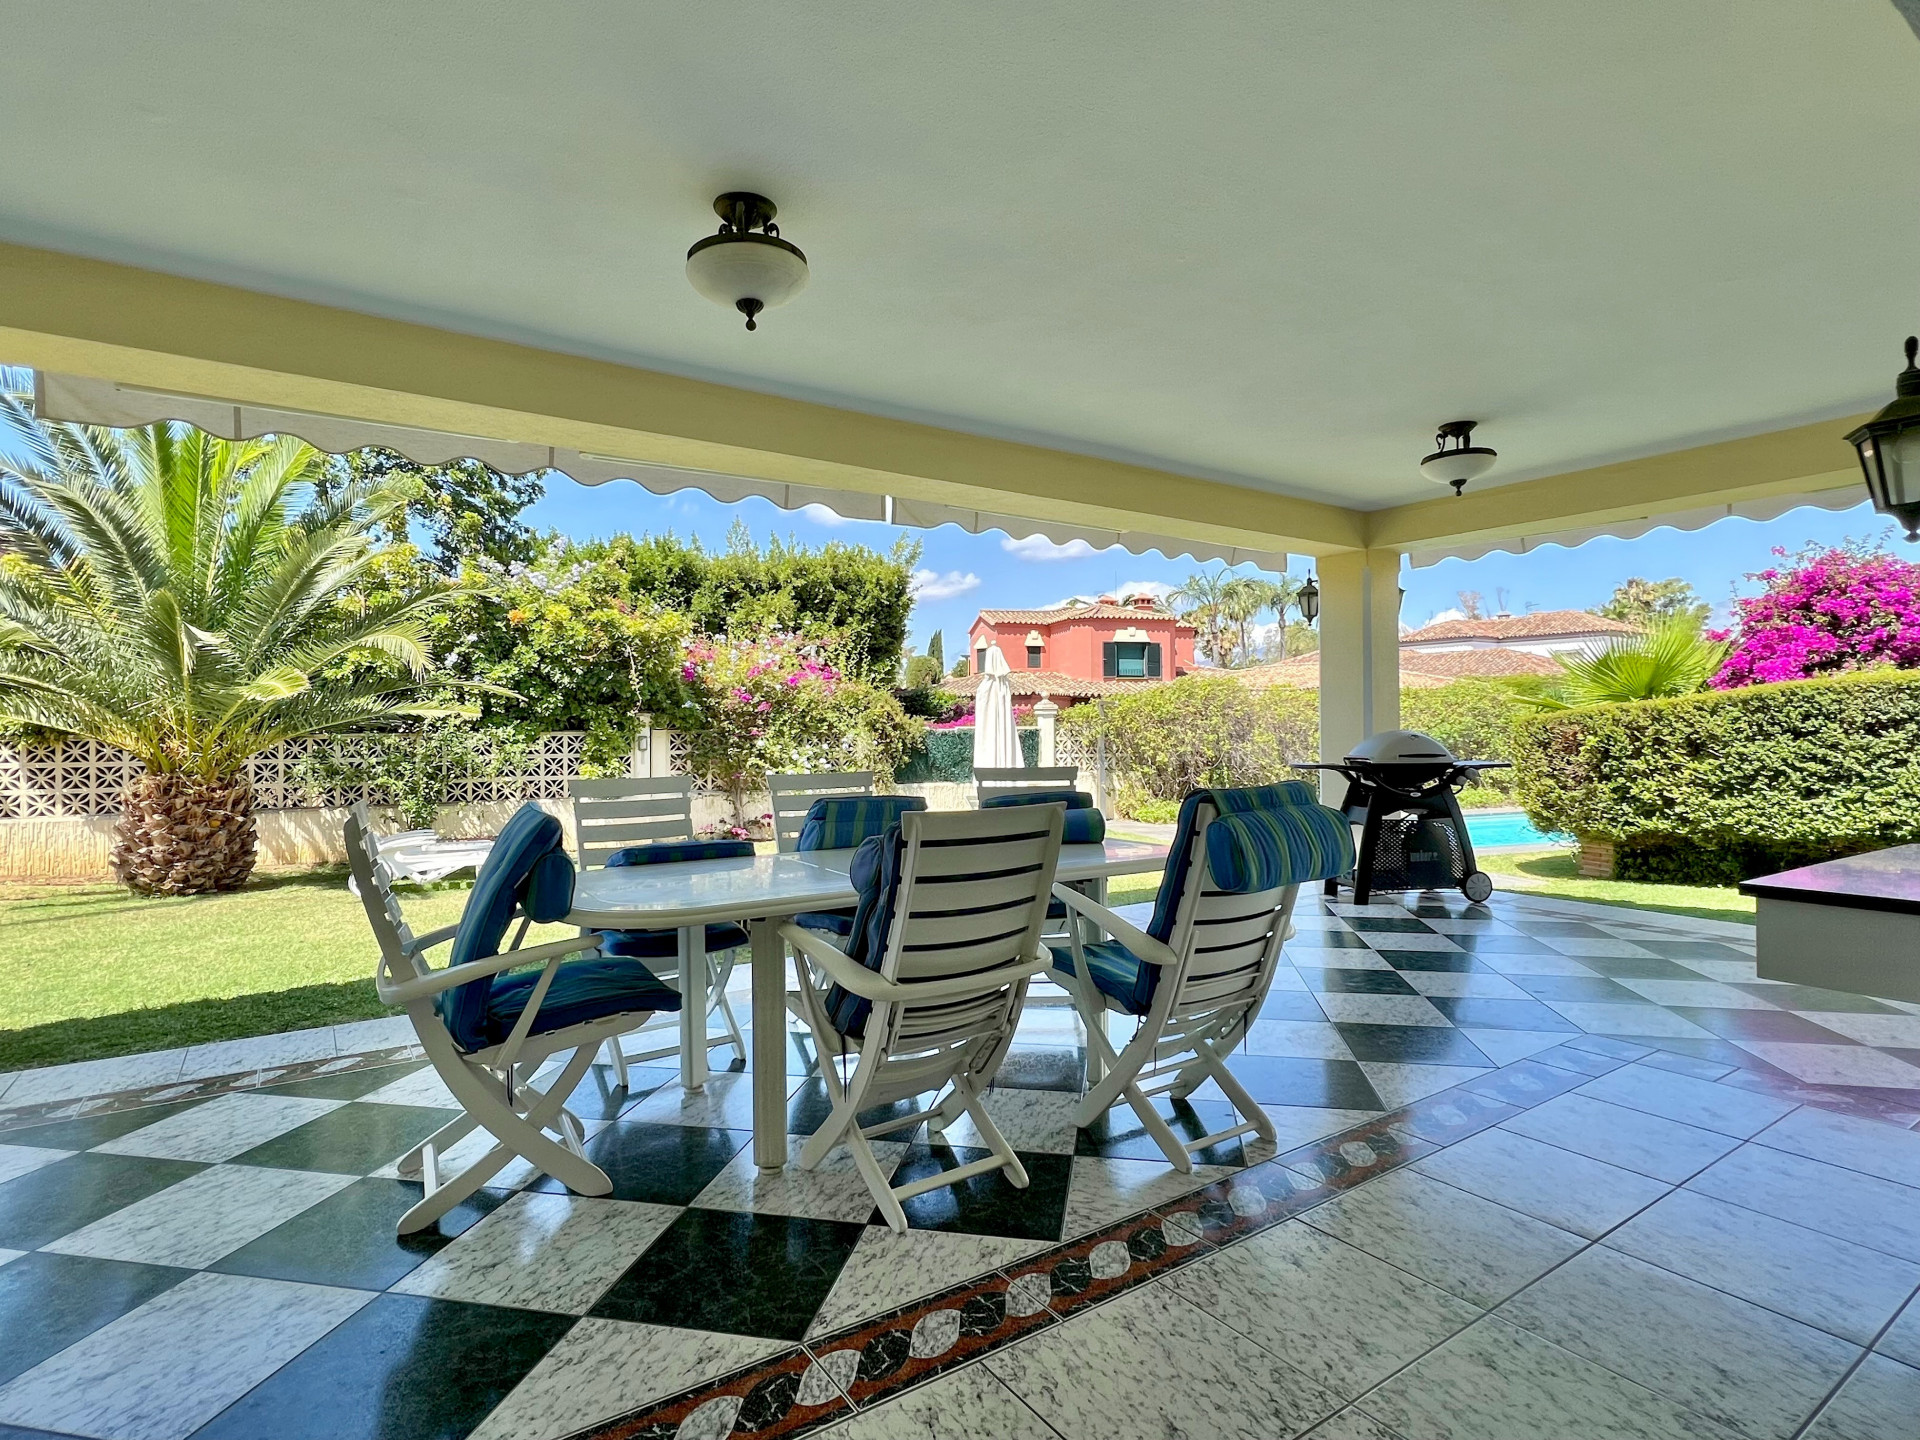 This villa in Guadalmina Baja is simply a great investment. Located in an exclusive and tranquil environment, it offers the luxury and comfort one would expect in a high-end residence on the Costa del Sol